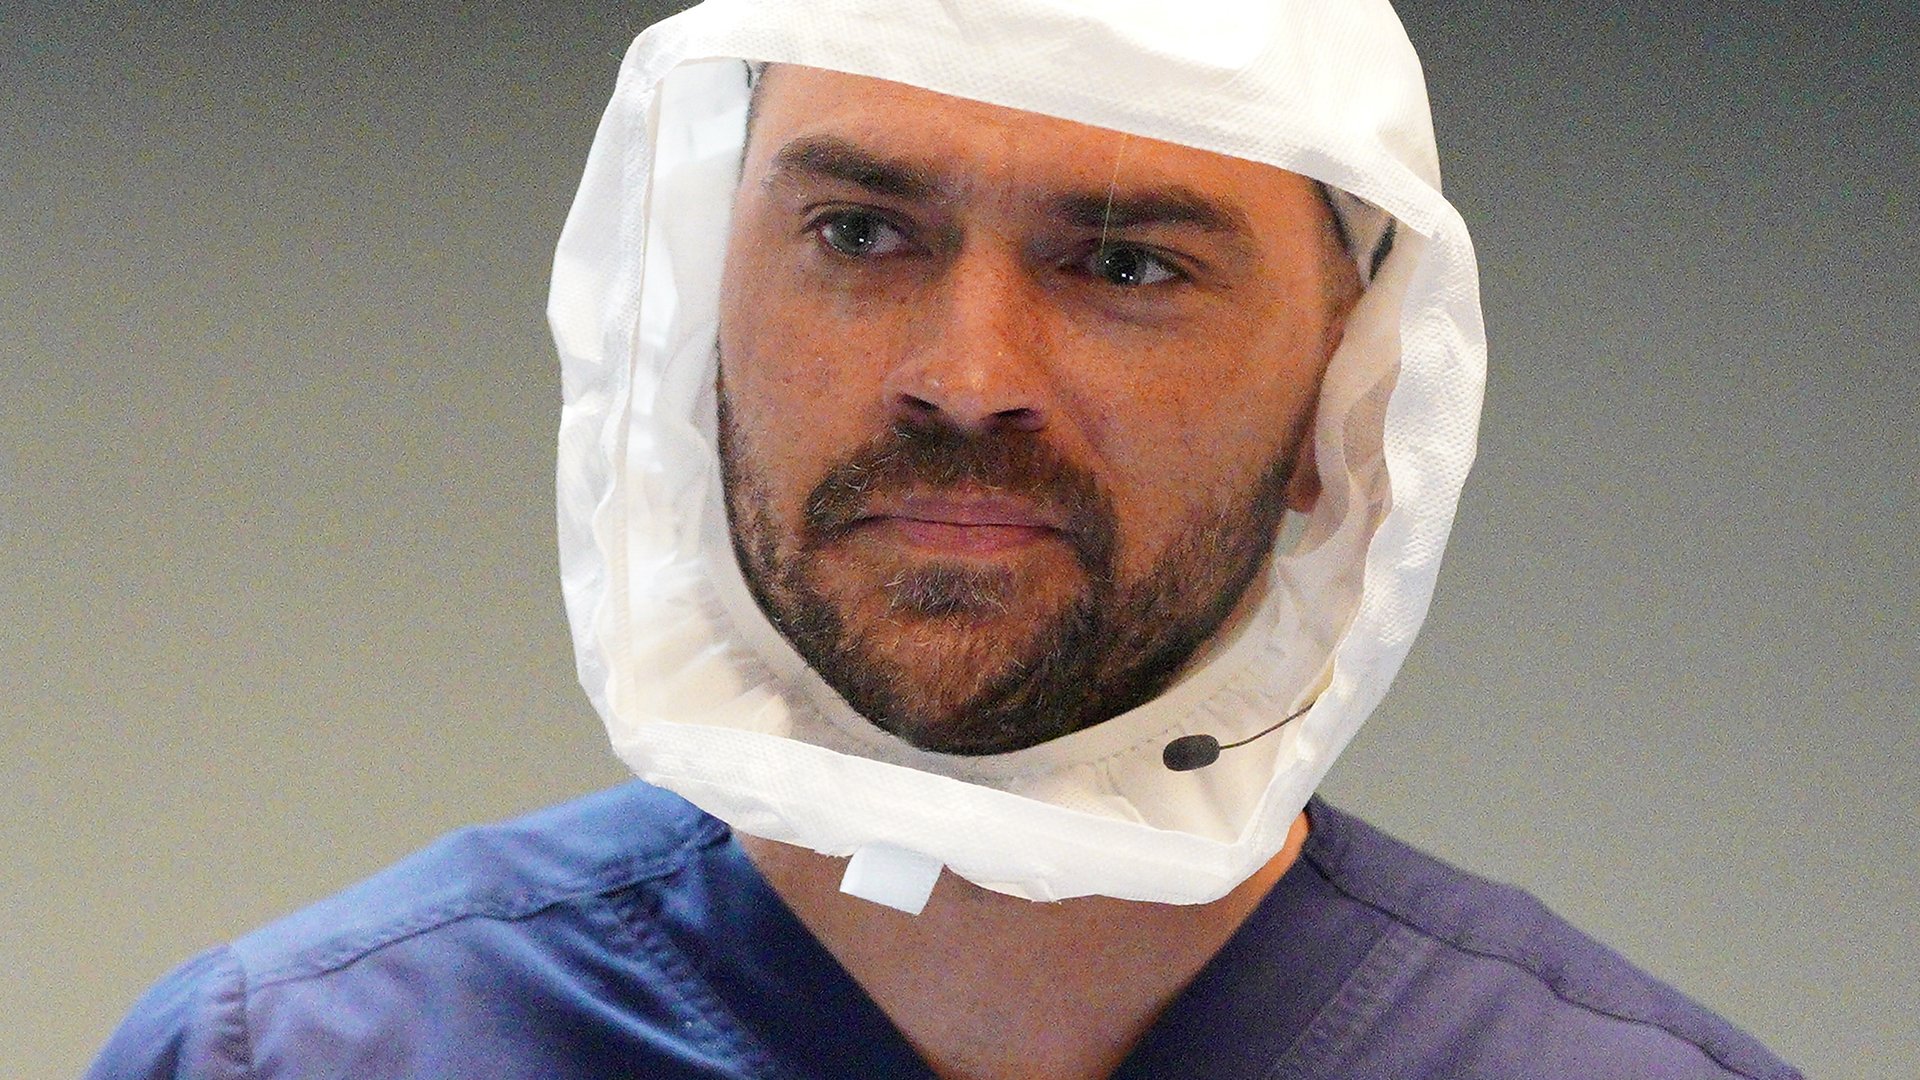 Jesse Williams as Jackson Avery looking off to the distance in ‘Grey’s Anatomy’ Season 17 Episode 12, “Sign O’ the Times.”